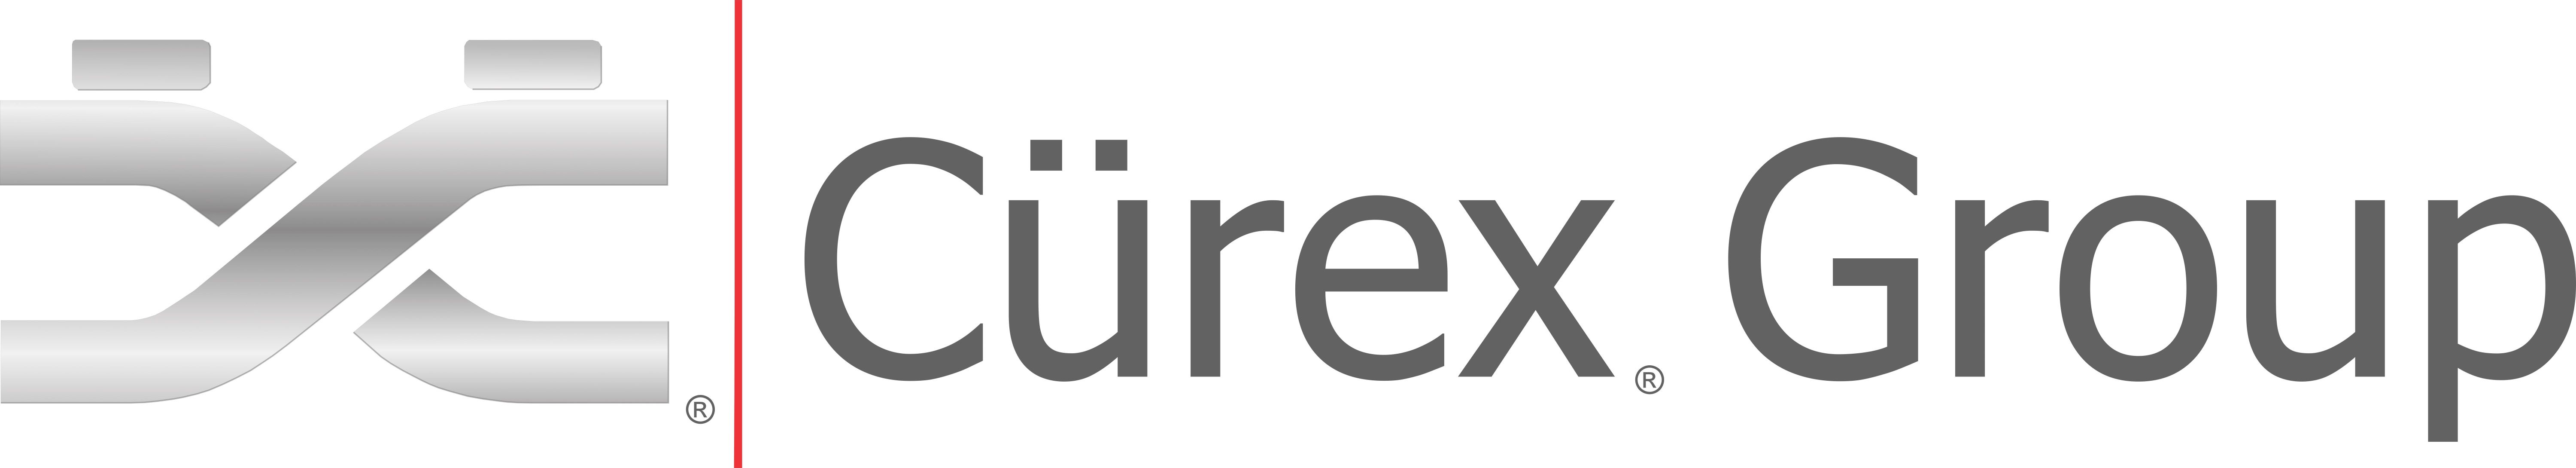 Cürex Group Announces Agreement with CalPERS to License Cipher Data Analytics Platform